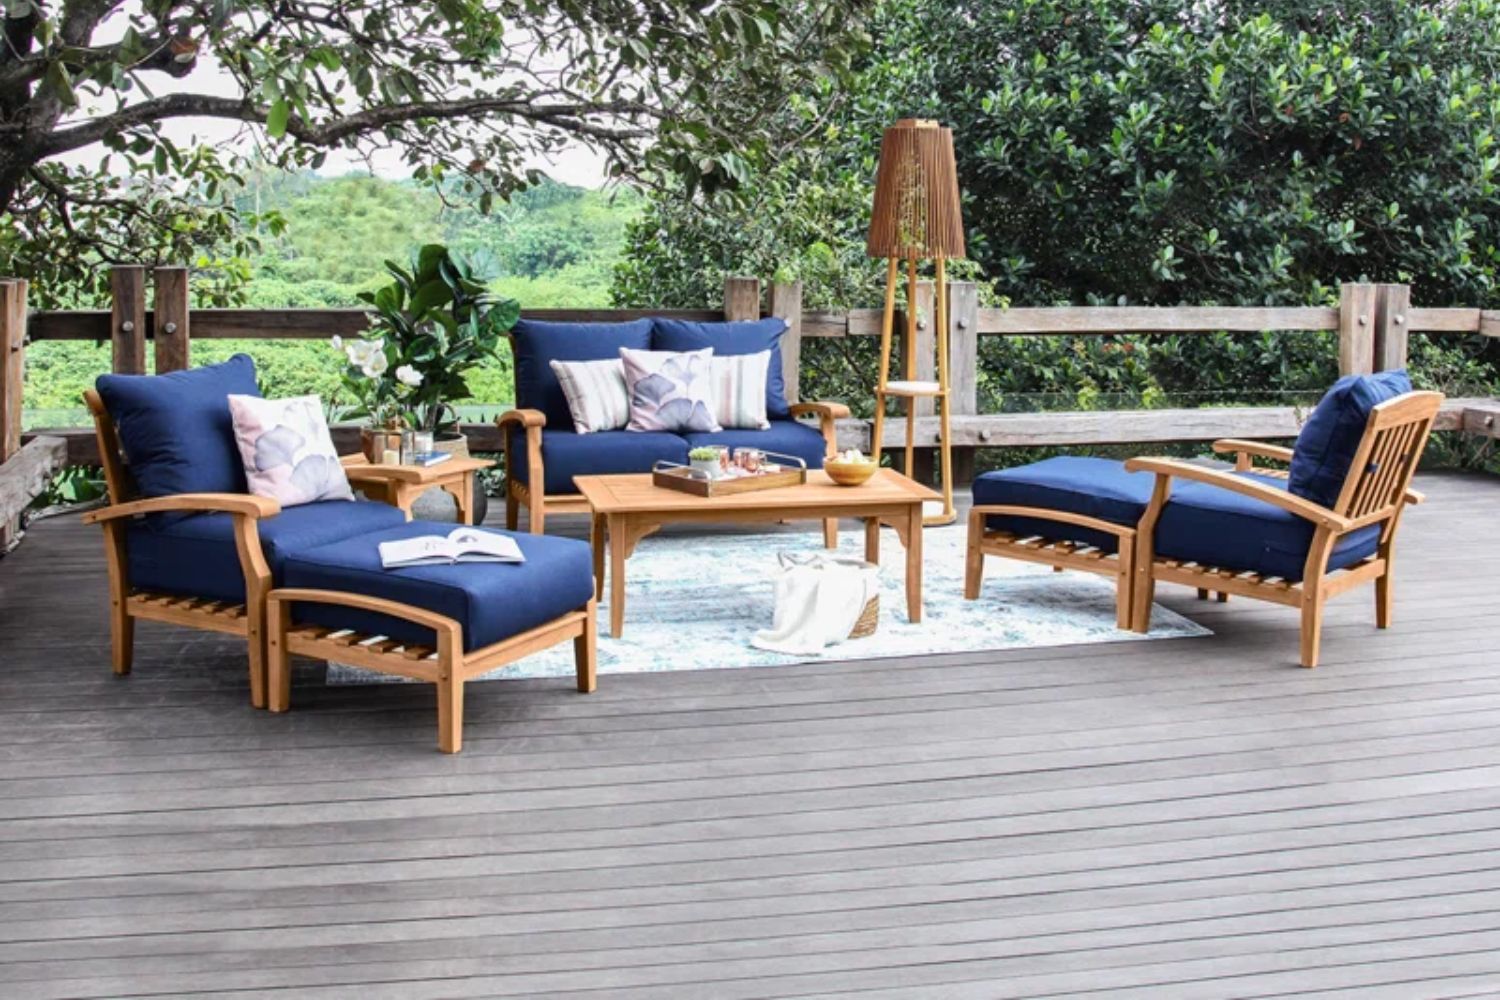 The Best Teak Outdoor Furniture Option: Birch Lane Summerton Teak Six-Person Seating Group with Cushions